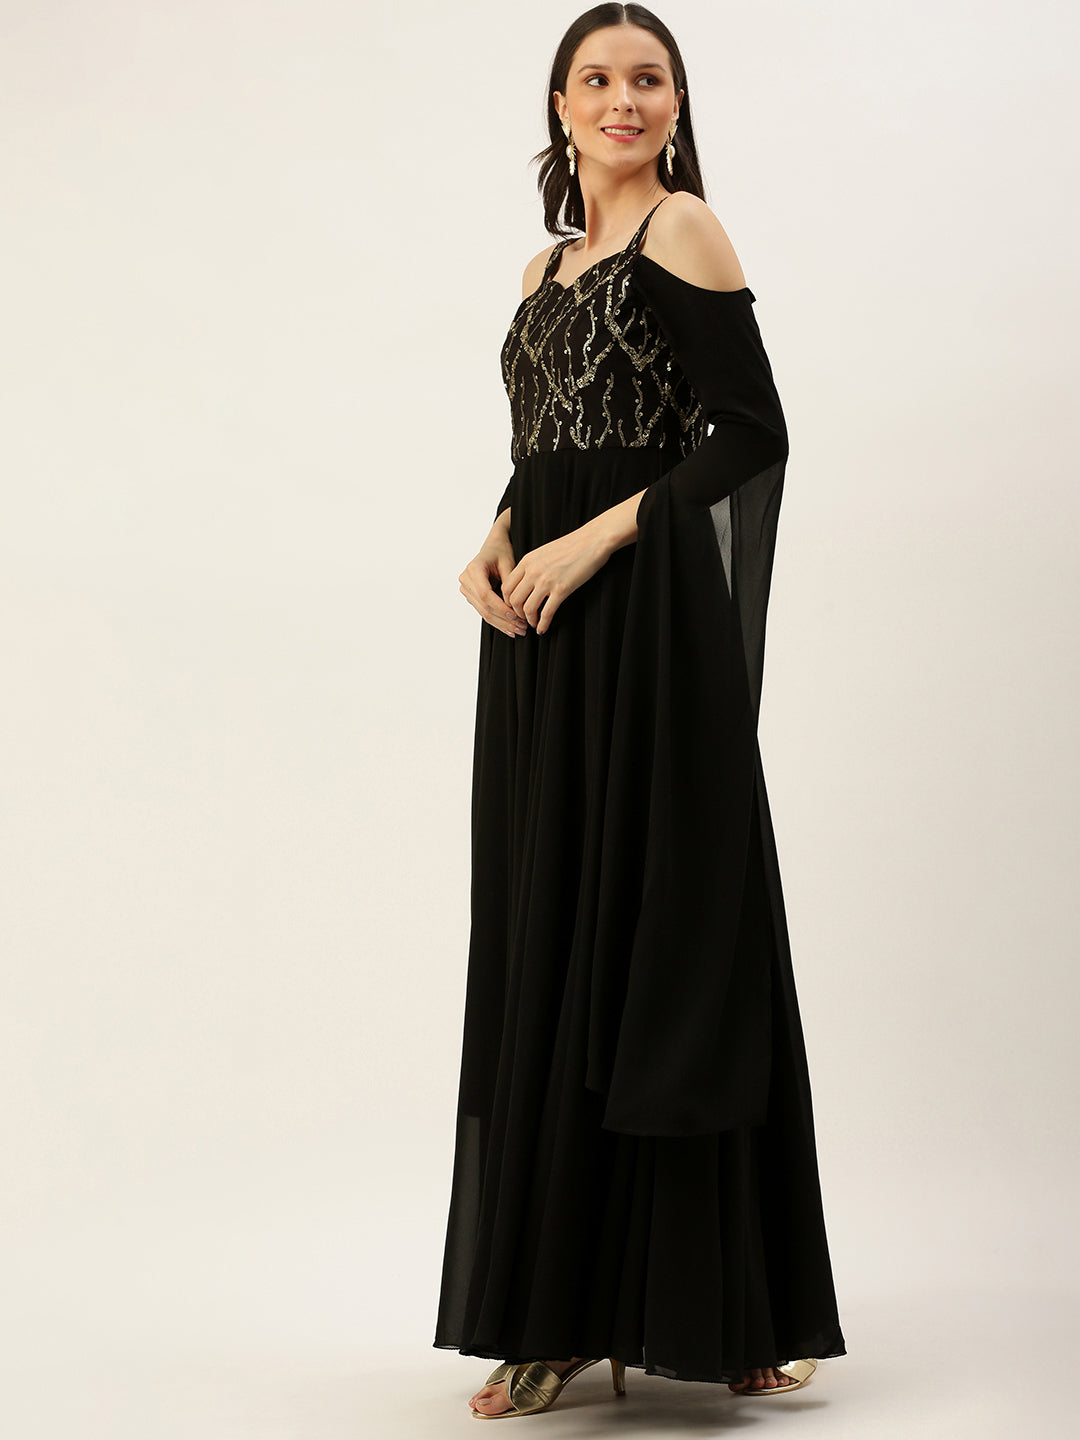 Black-Net-Embroidered-Cape-Style-Sleeve-Gown